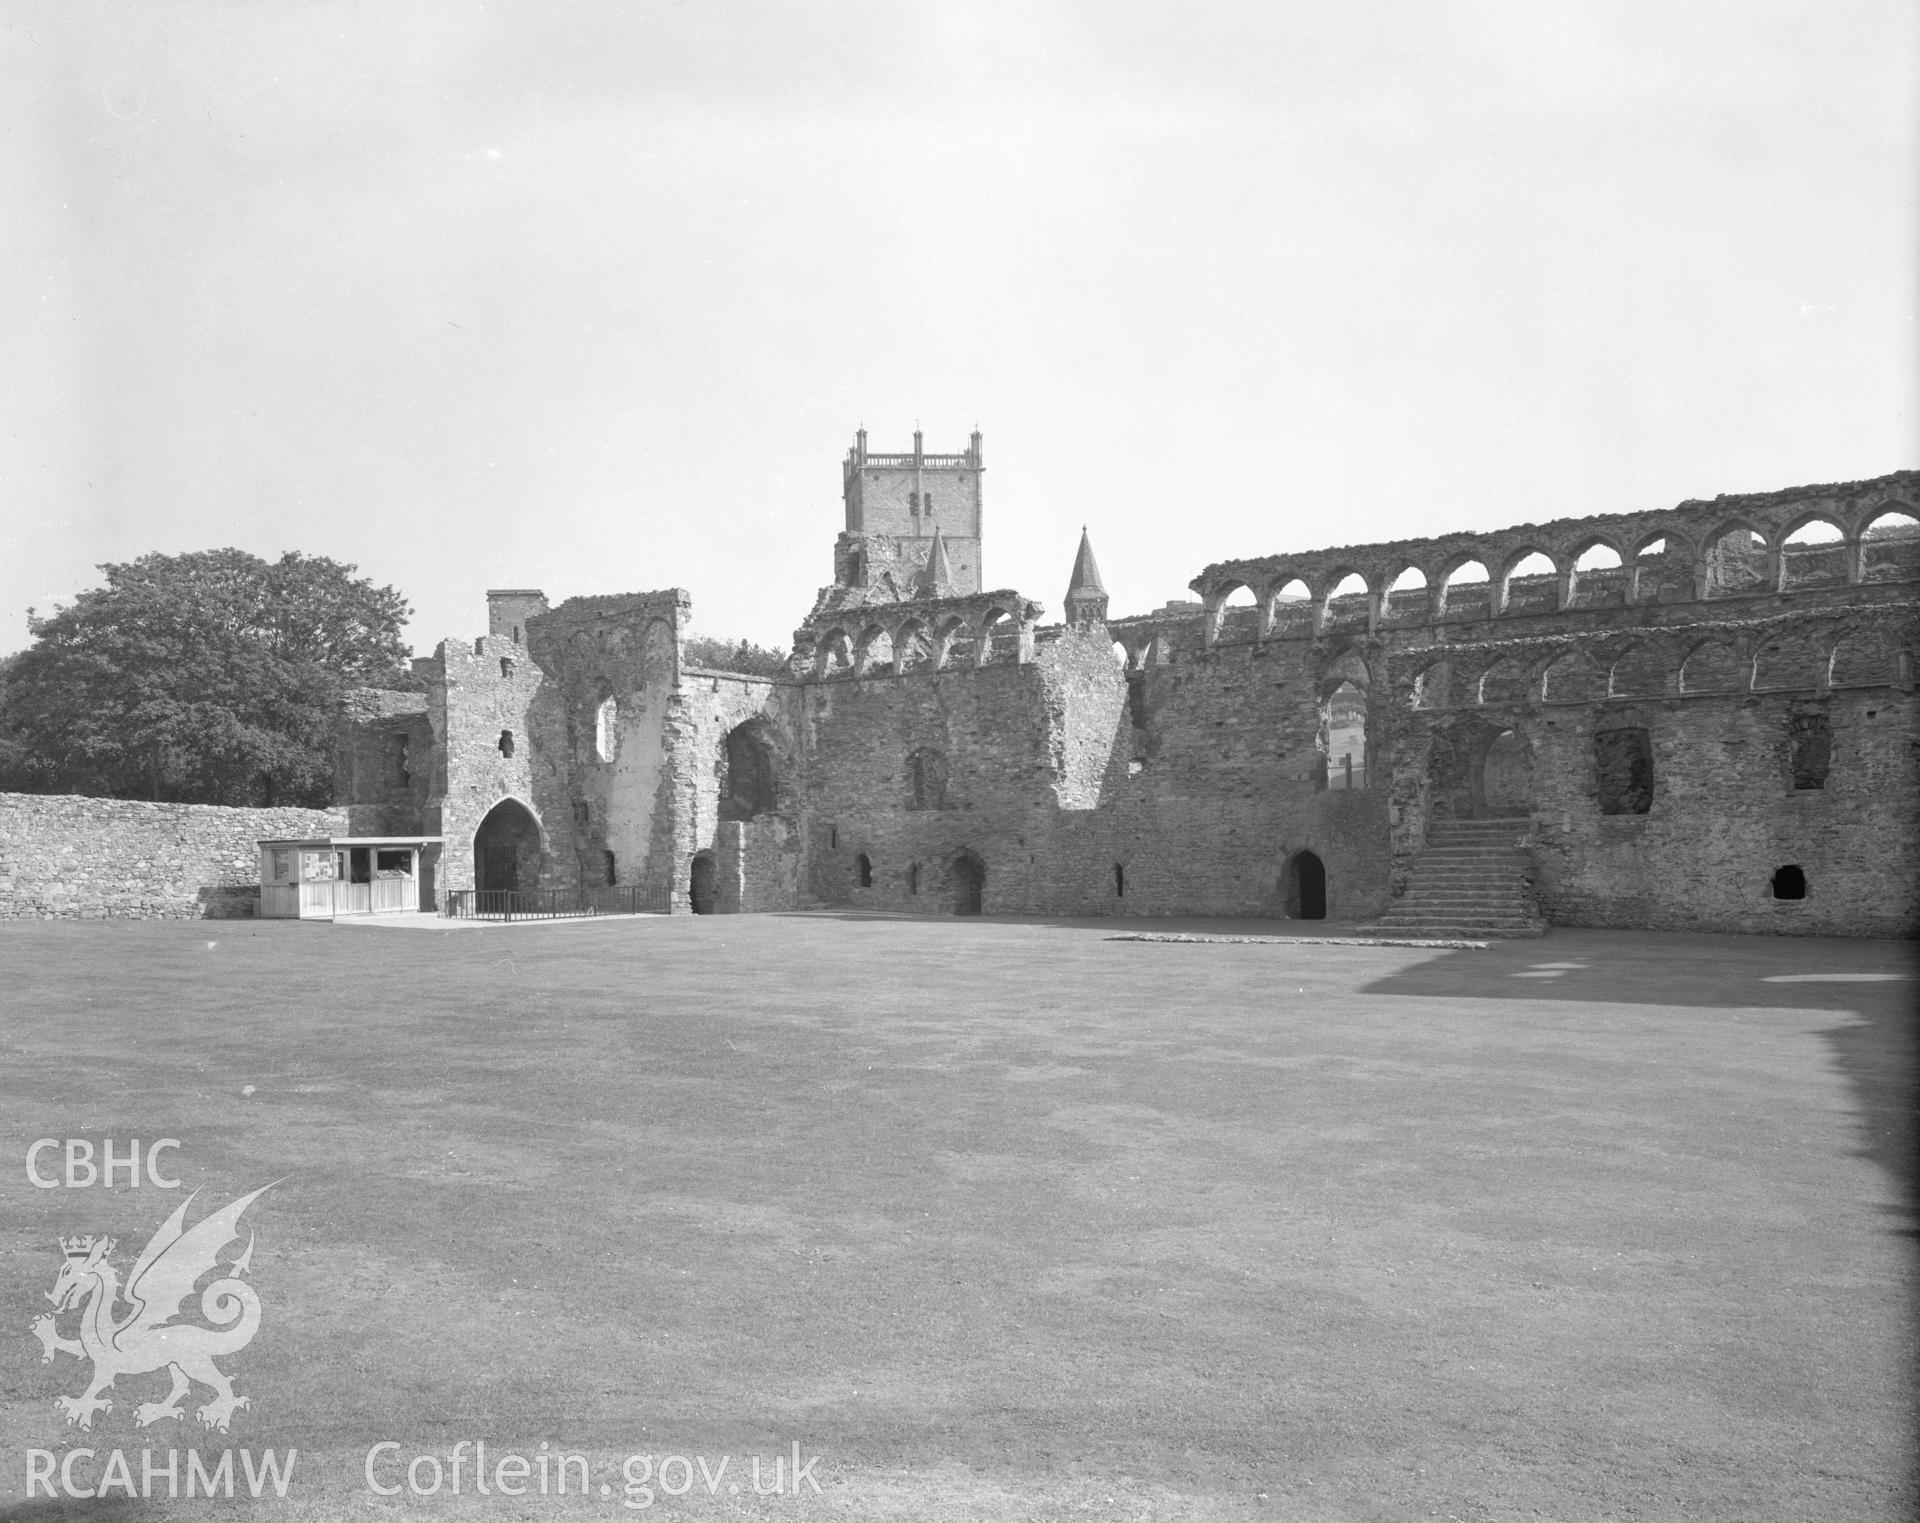 Digital copy of a view of Bishops Palace, St Davids.